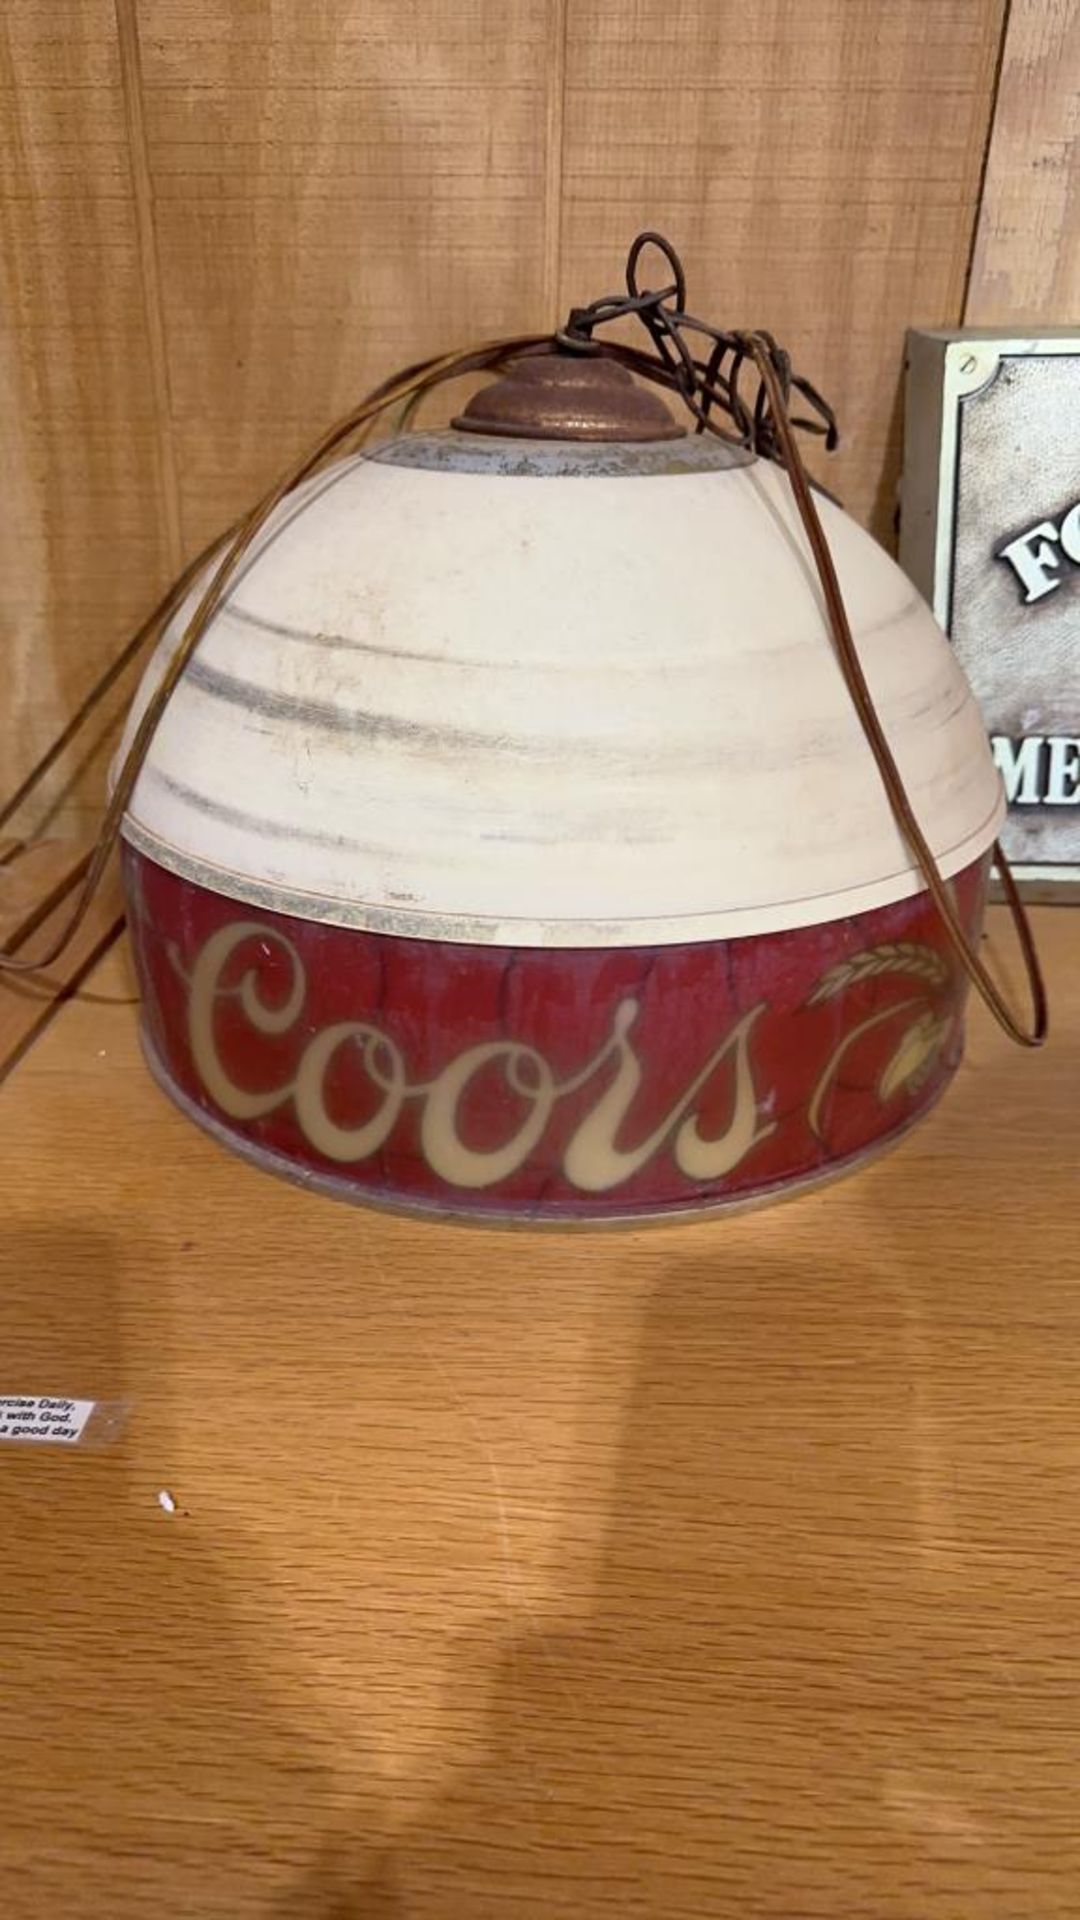 Coors light fixture & Foster’s Lager sign - Image 2 of 3